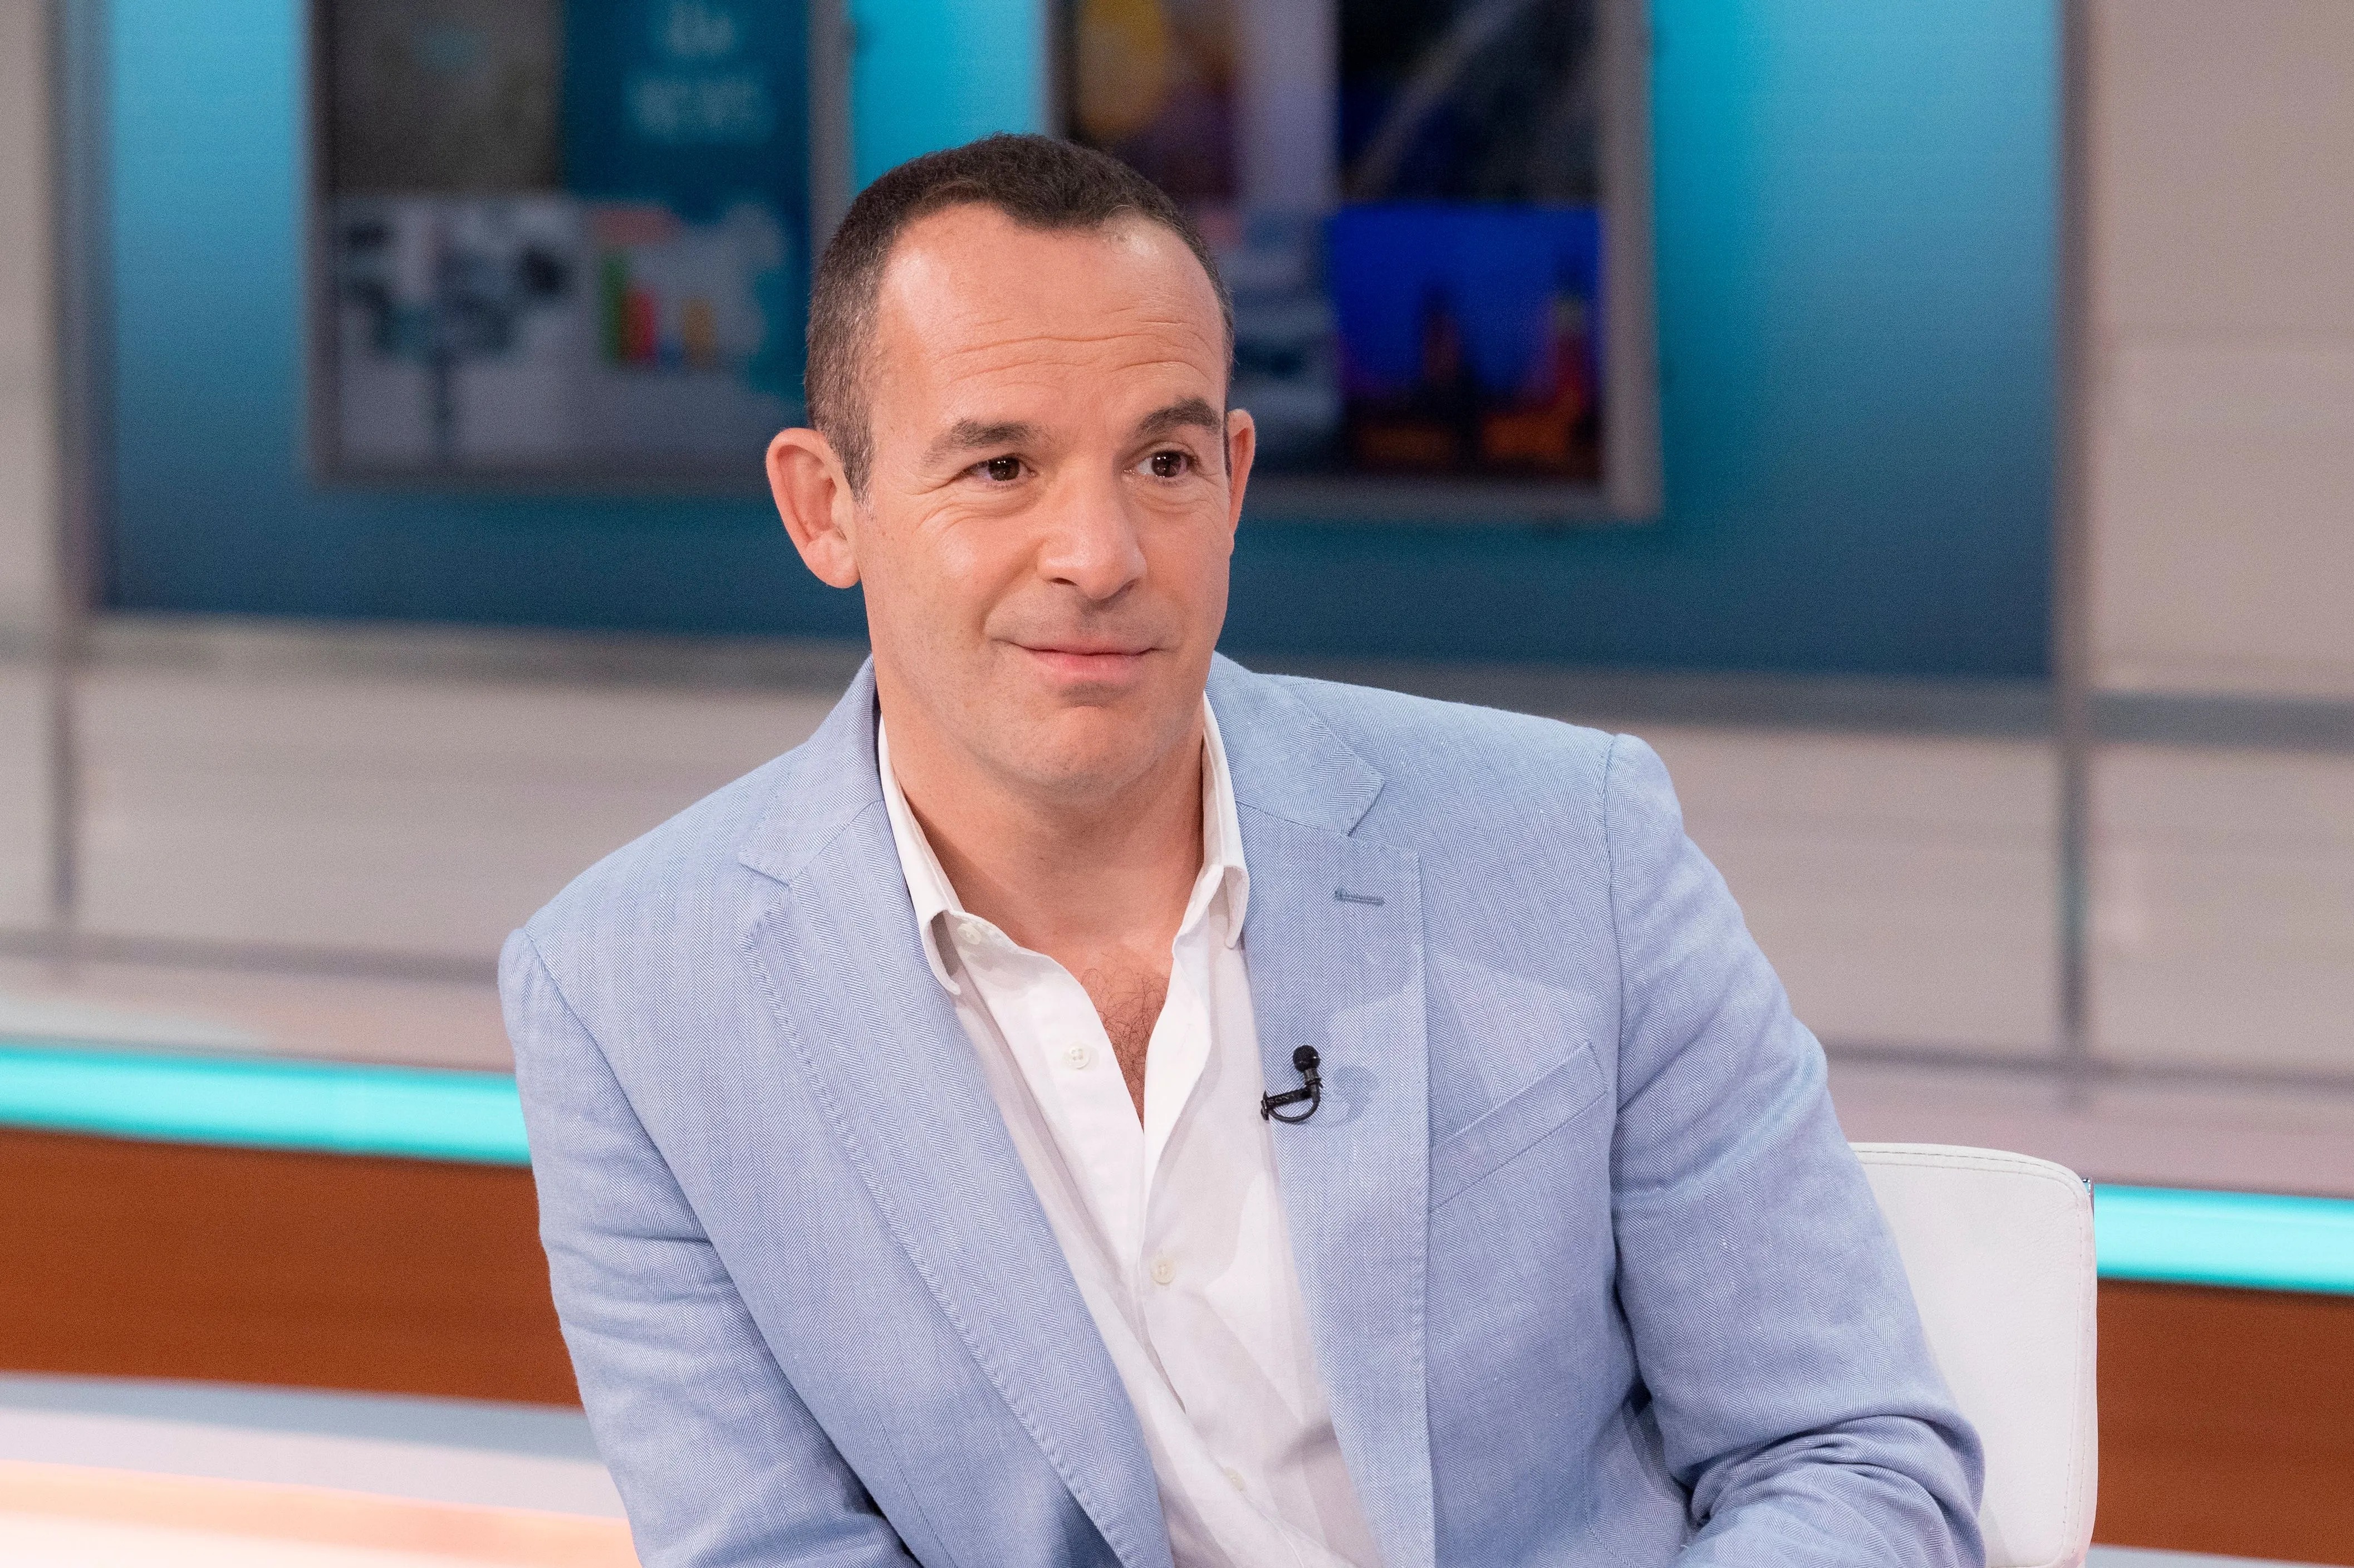 Martin Lewis issues energy bills rise update - and it's good and bad news